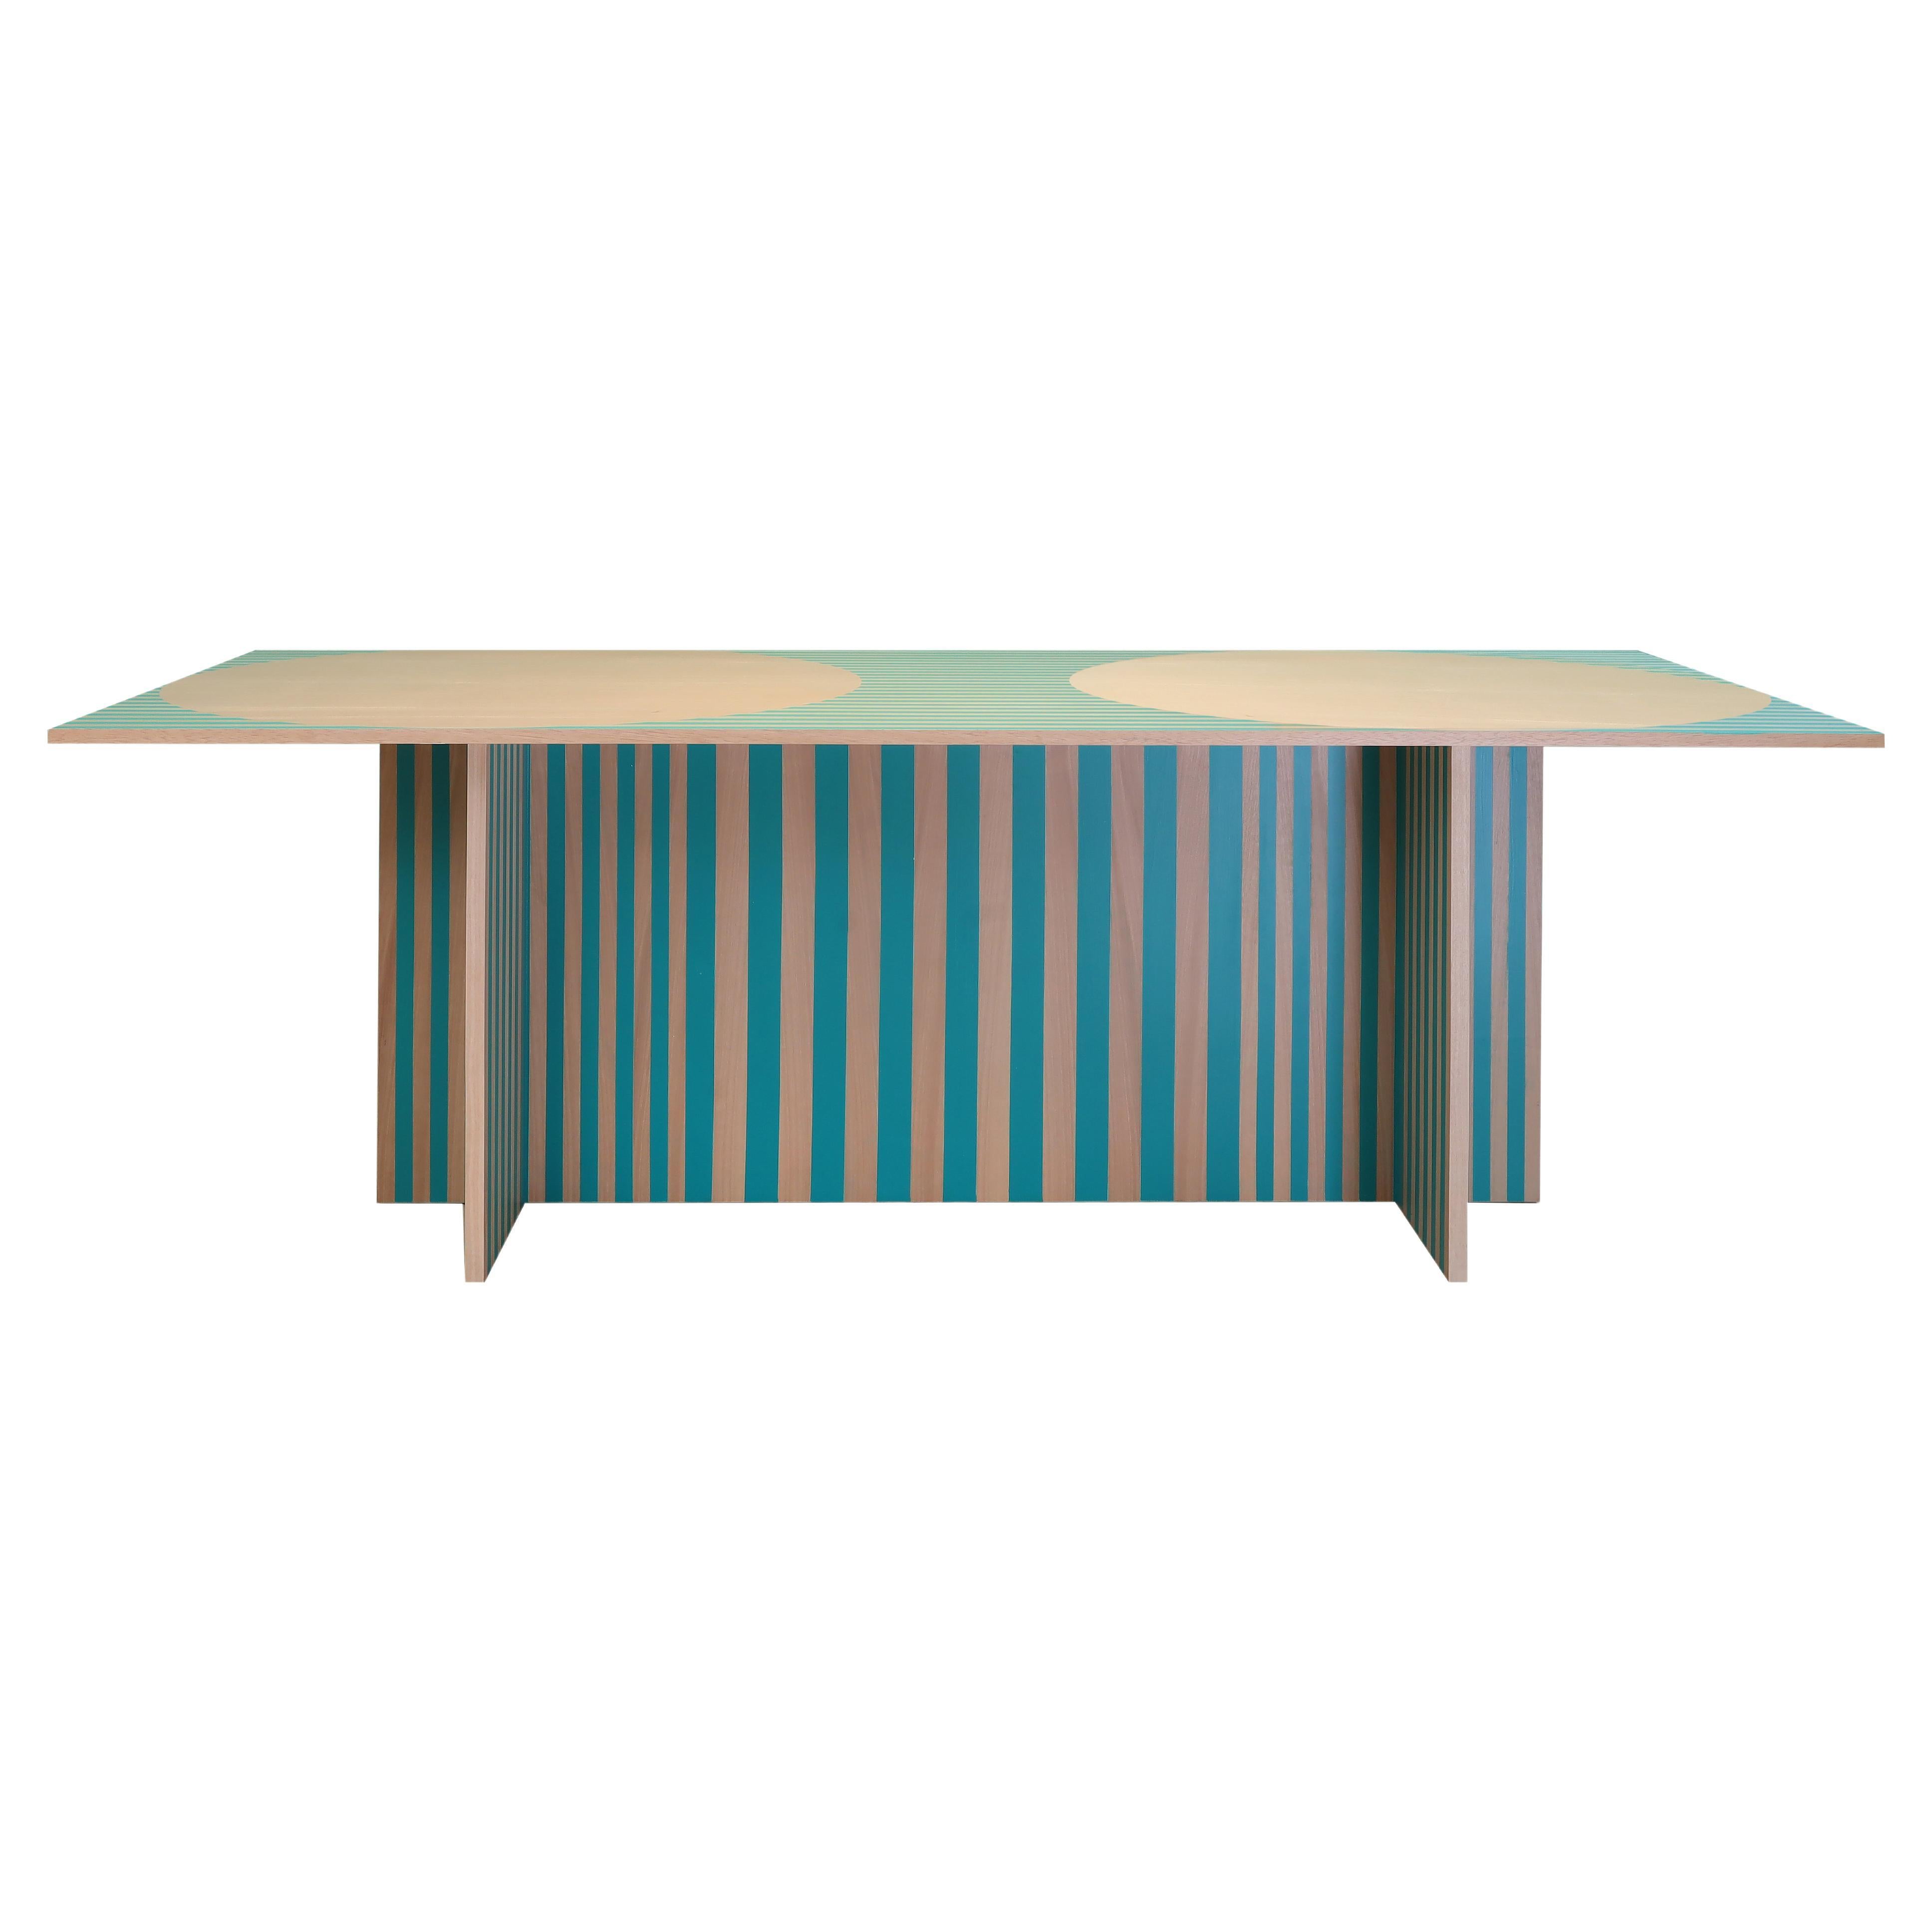 Dining table - striped, walnut blockboard - made in Italy by A. Epifani in stock